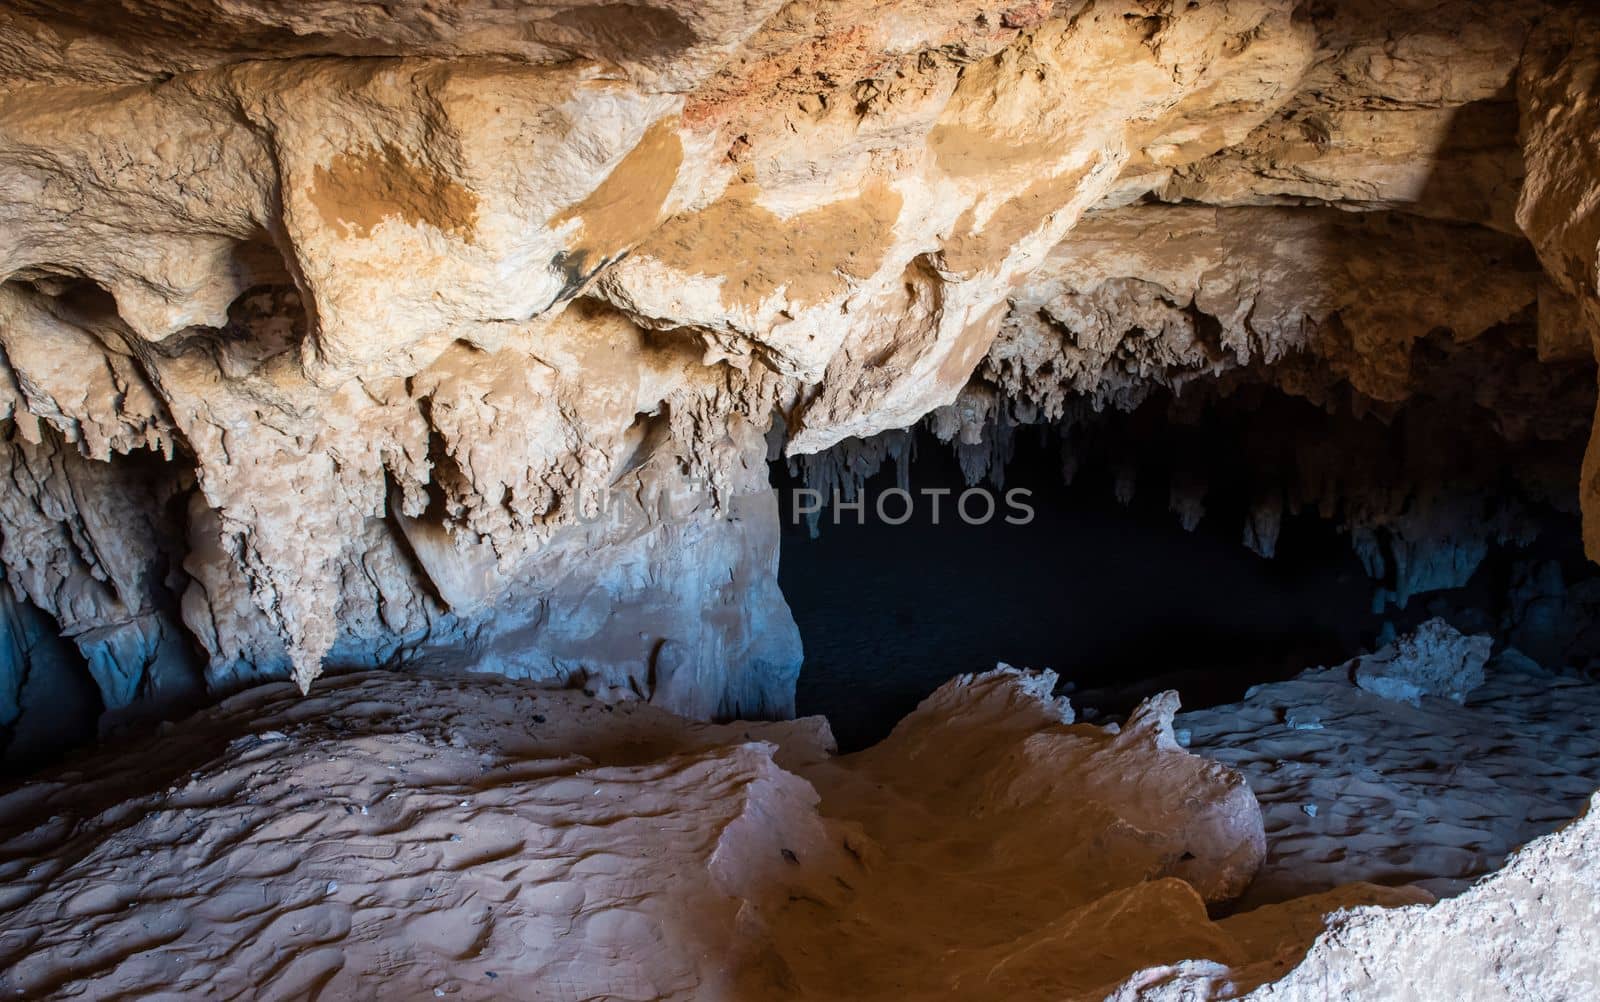 Inside interior of a large underground cave cavern with calcite stalactites hanging from the ceiling